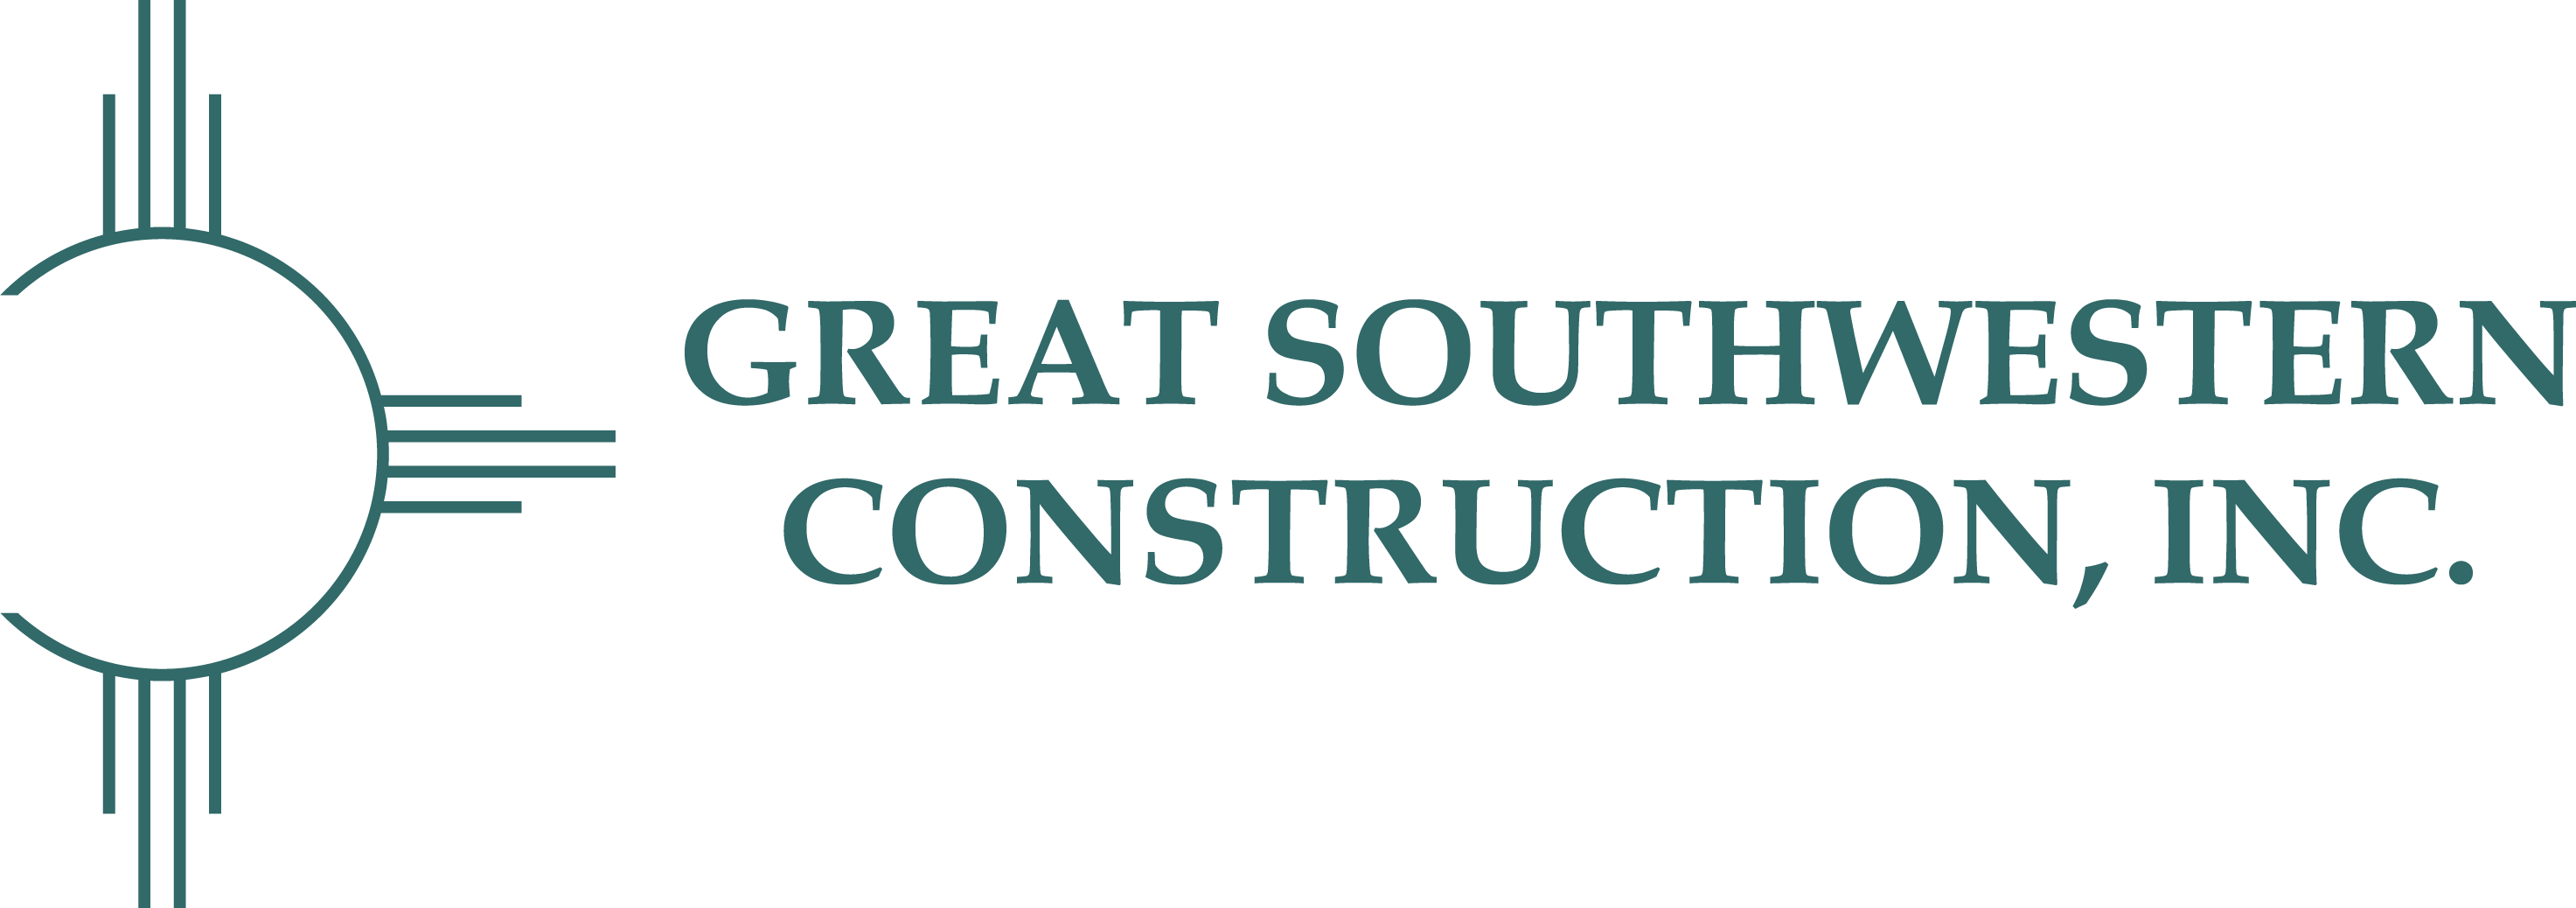 Great Southwestern Construction, Inc. at Electricity Forum